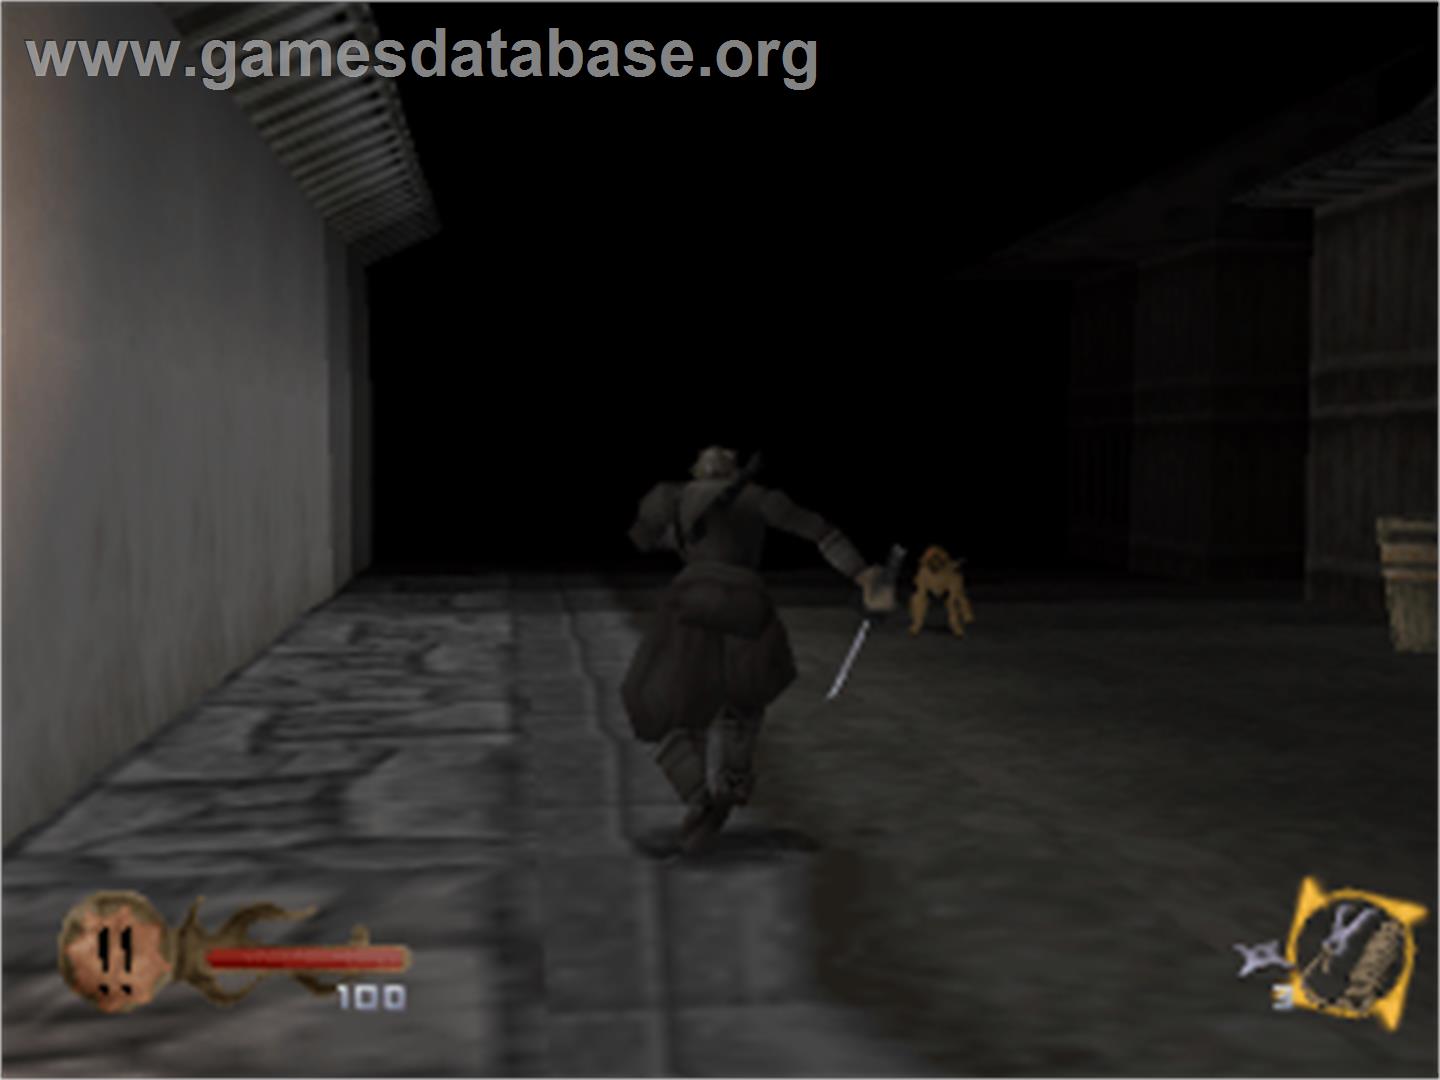 Tenchu: Stealth Assassins - Sony Playstation - Artwork - In Game